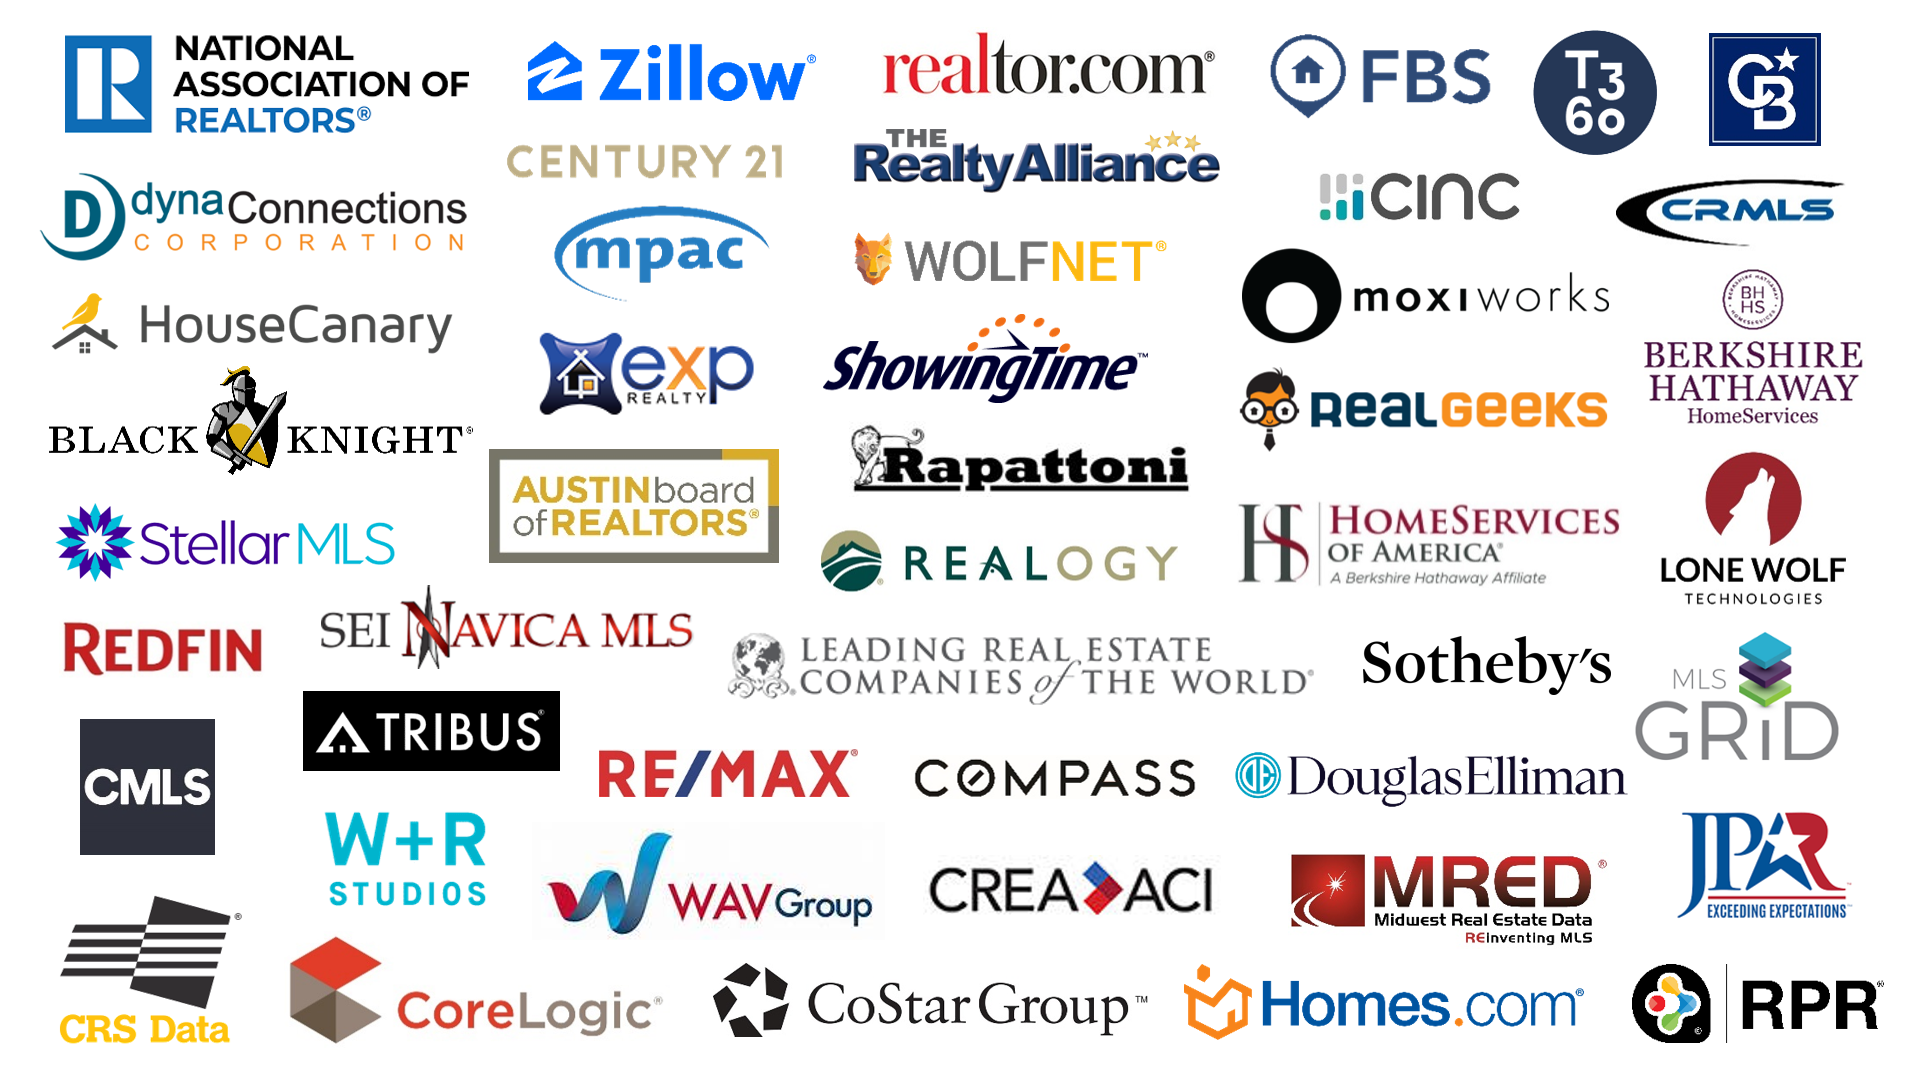 Updated Strong Partners 3.22.21 